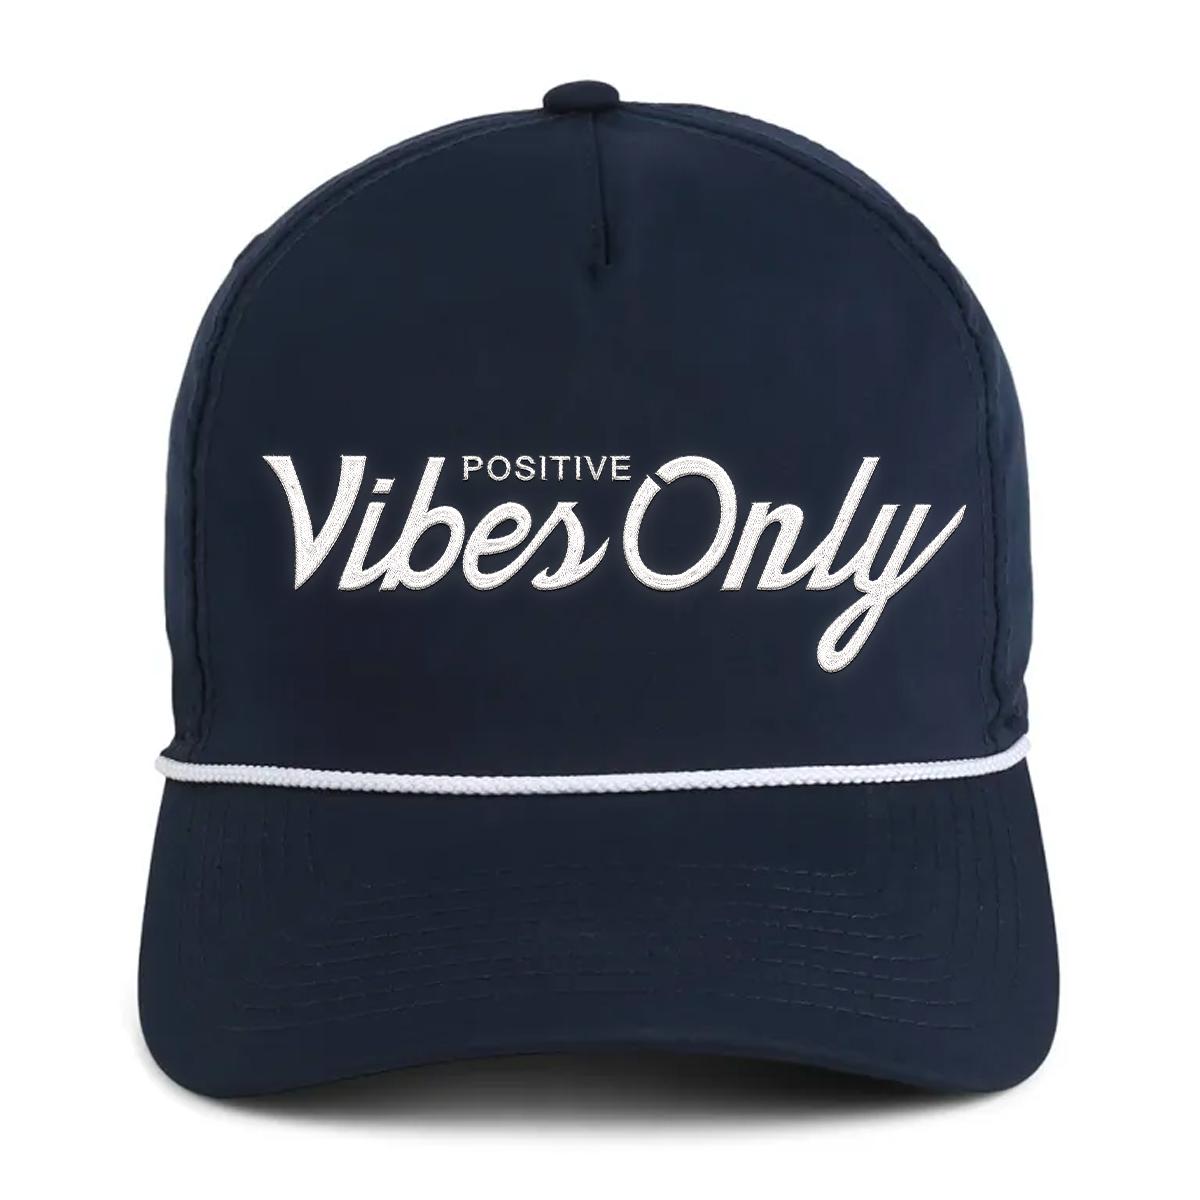 Positive Vibes Only Imperial Rope Hat-Hats-Barstool Sports-Navy/White-One Size-Barstool Sports